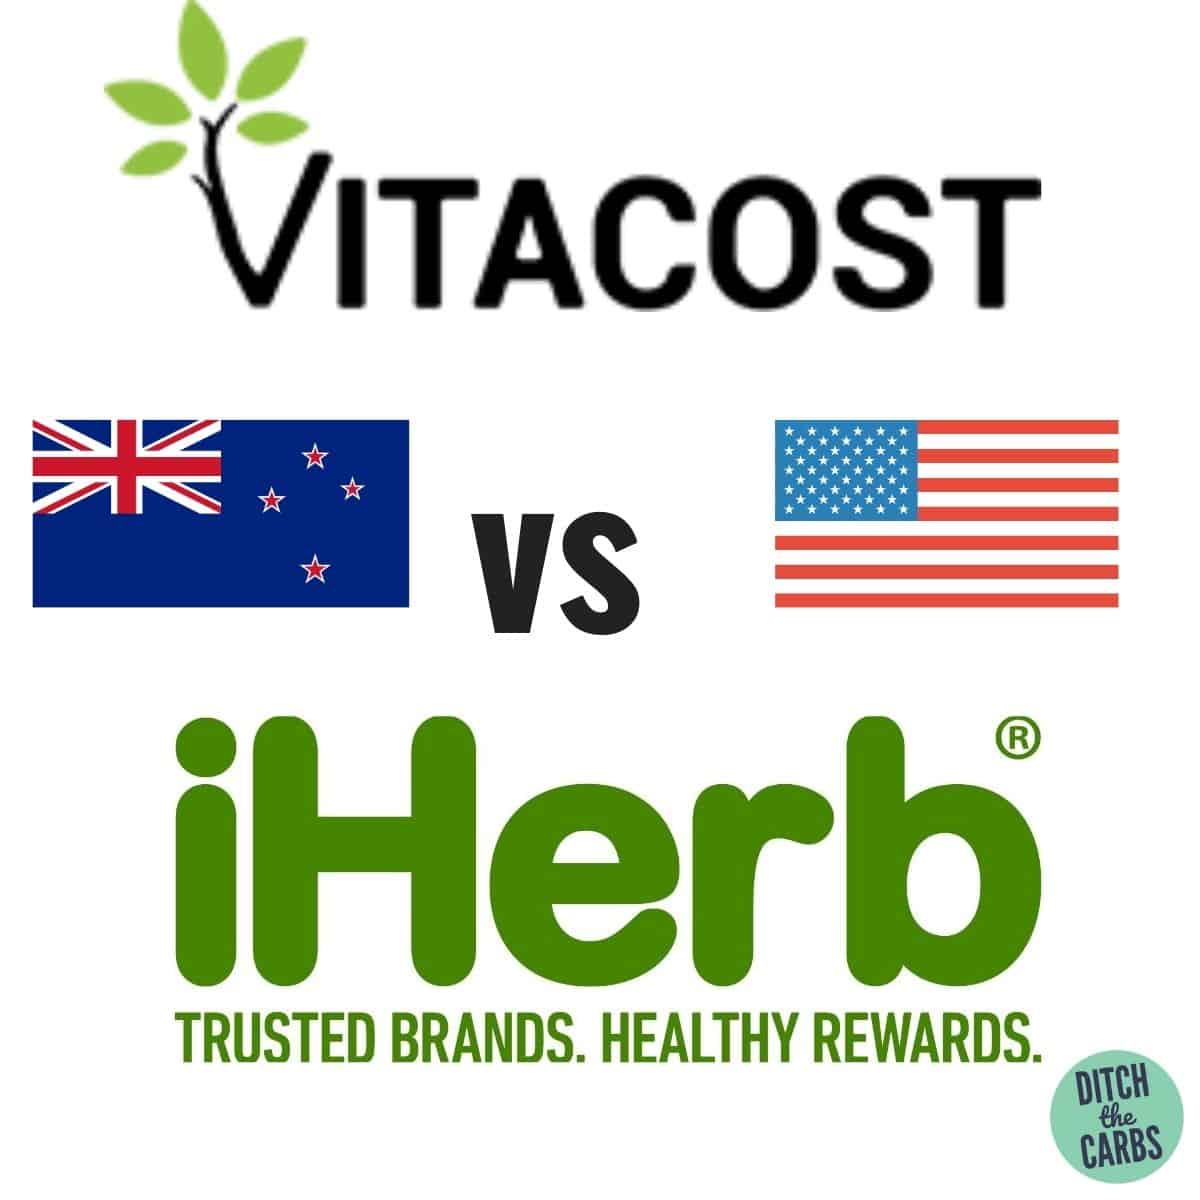 Why iherb discount Is A Tactic Not A Strategy